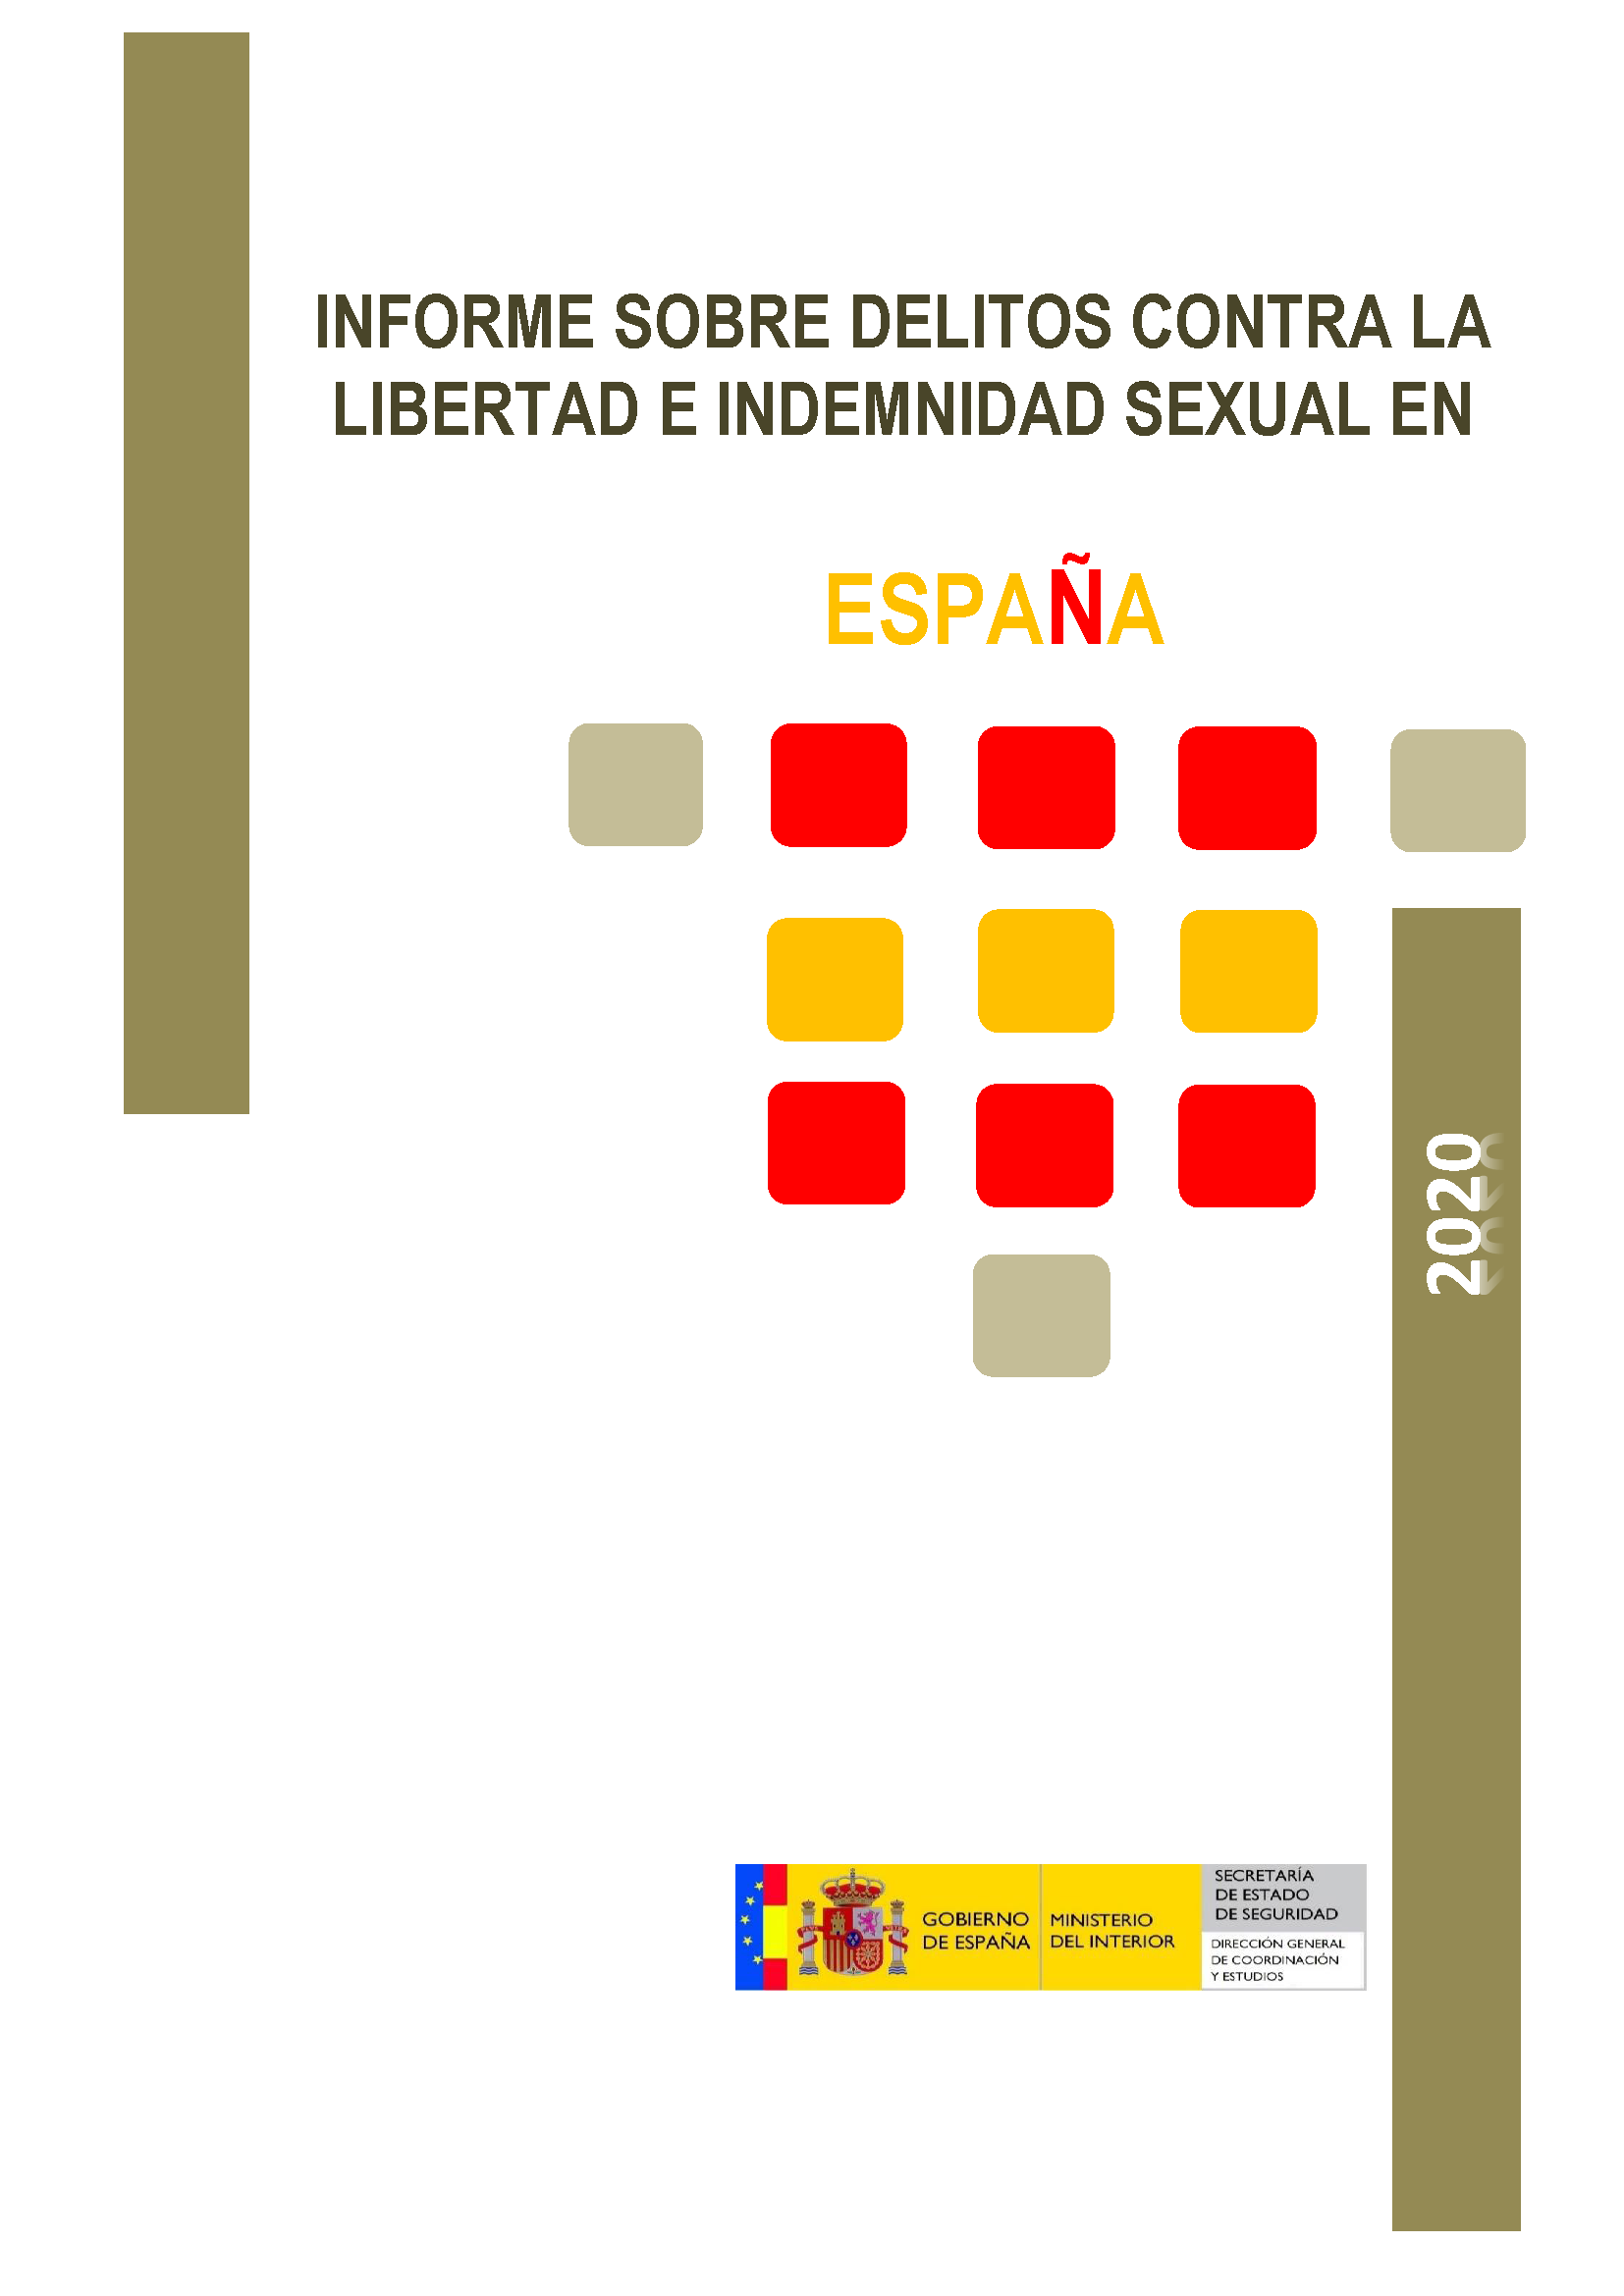 Report on crimes against sexual freedom and indemnity in Spain 2020